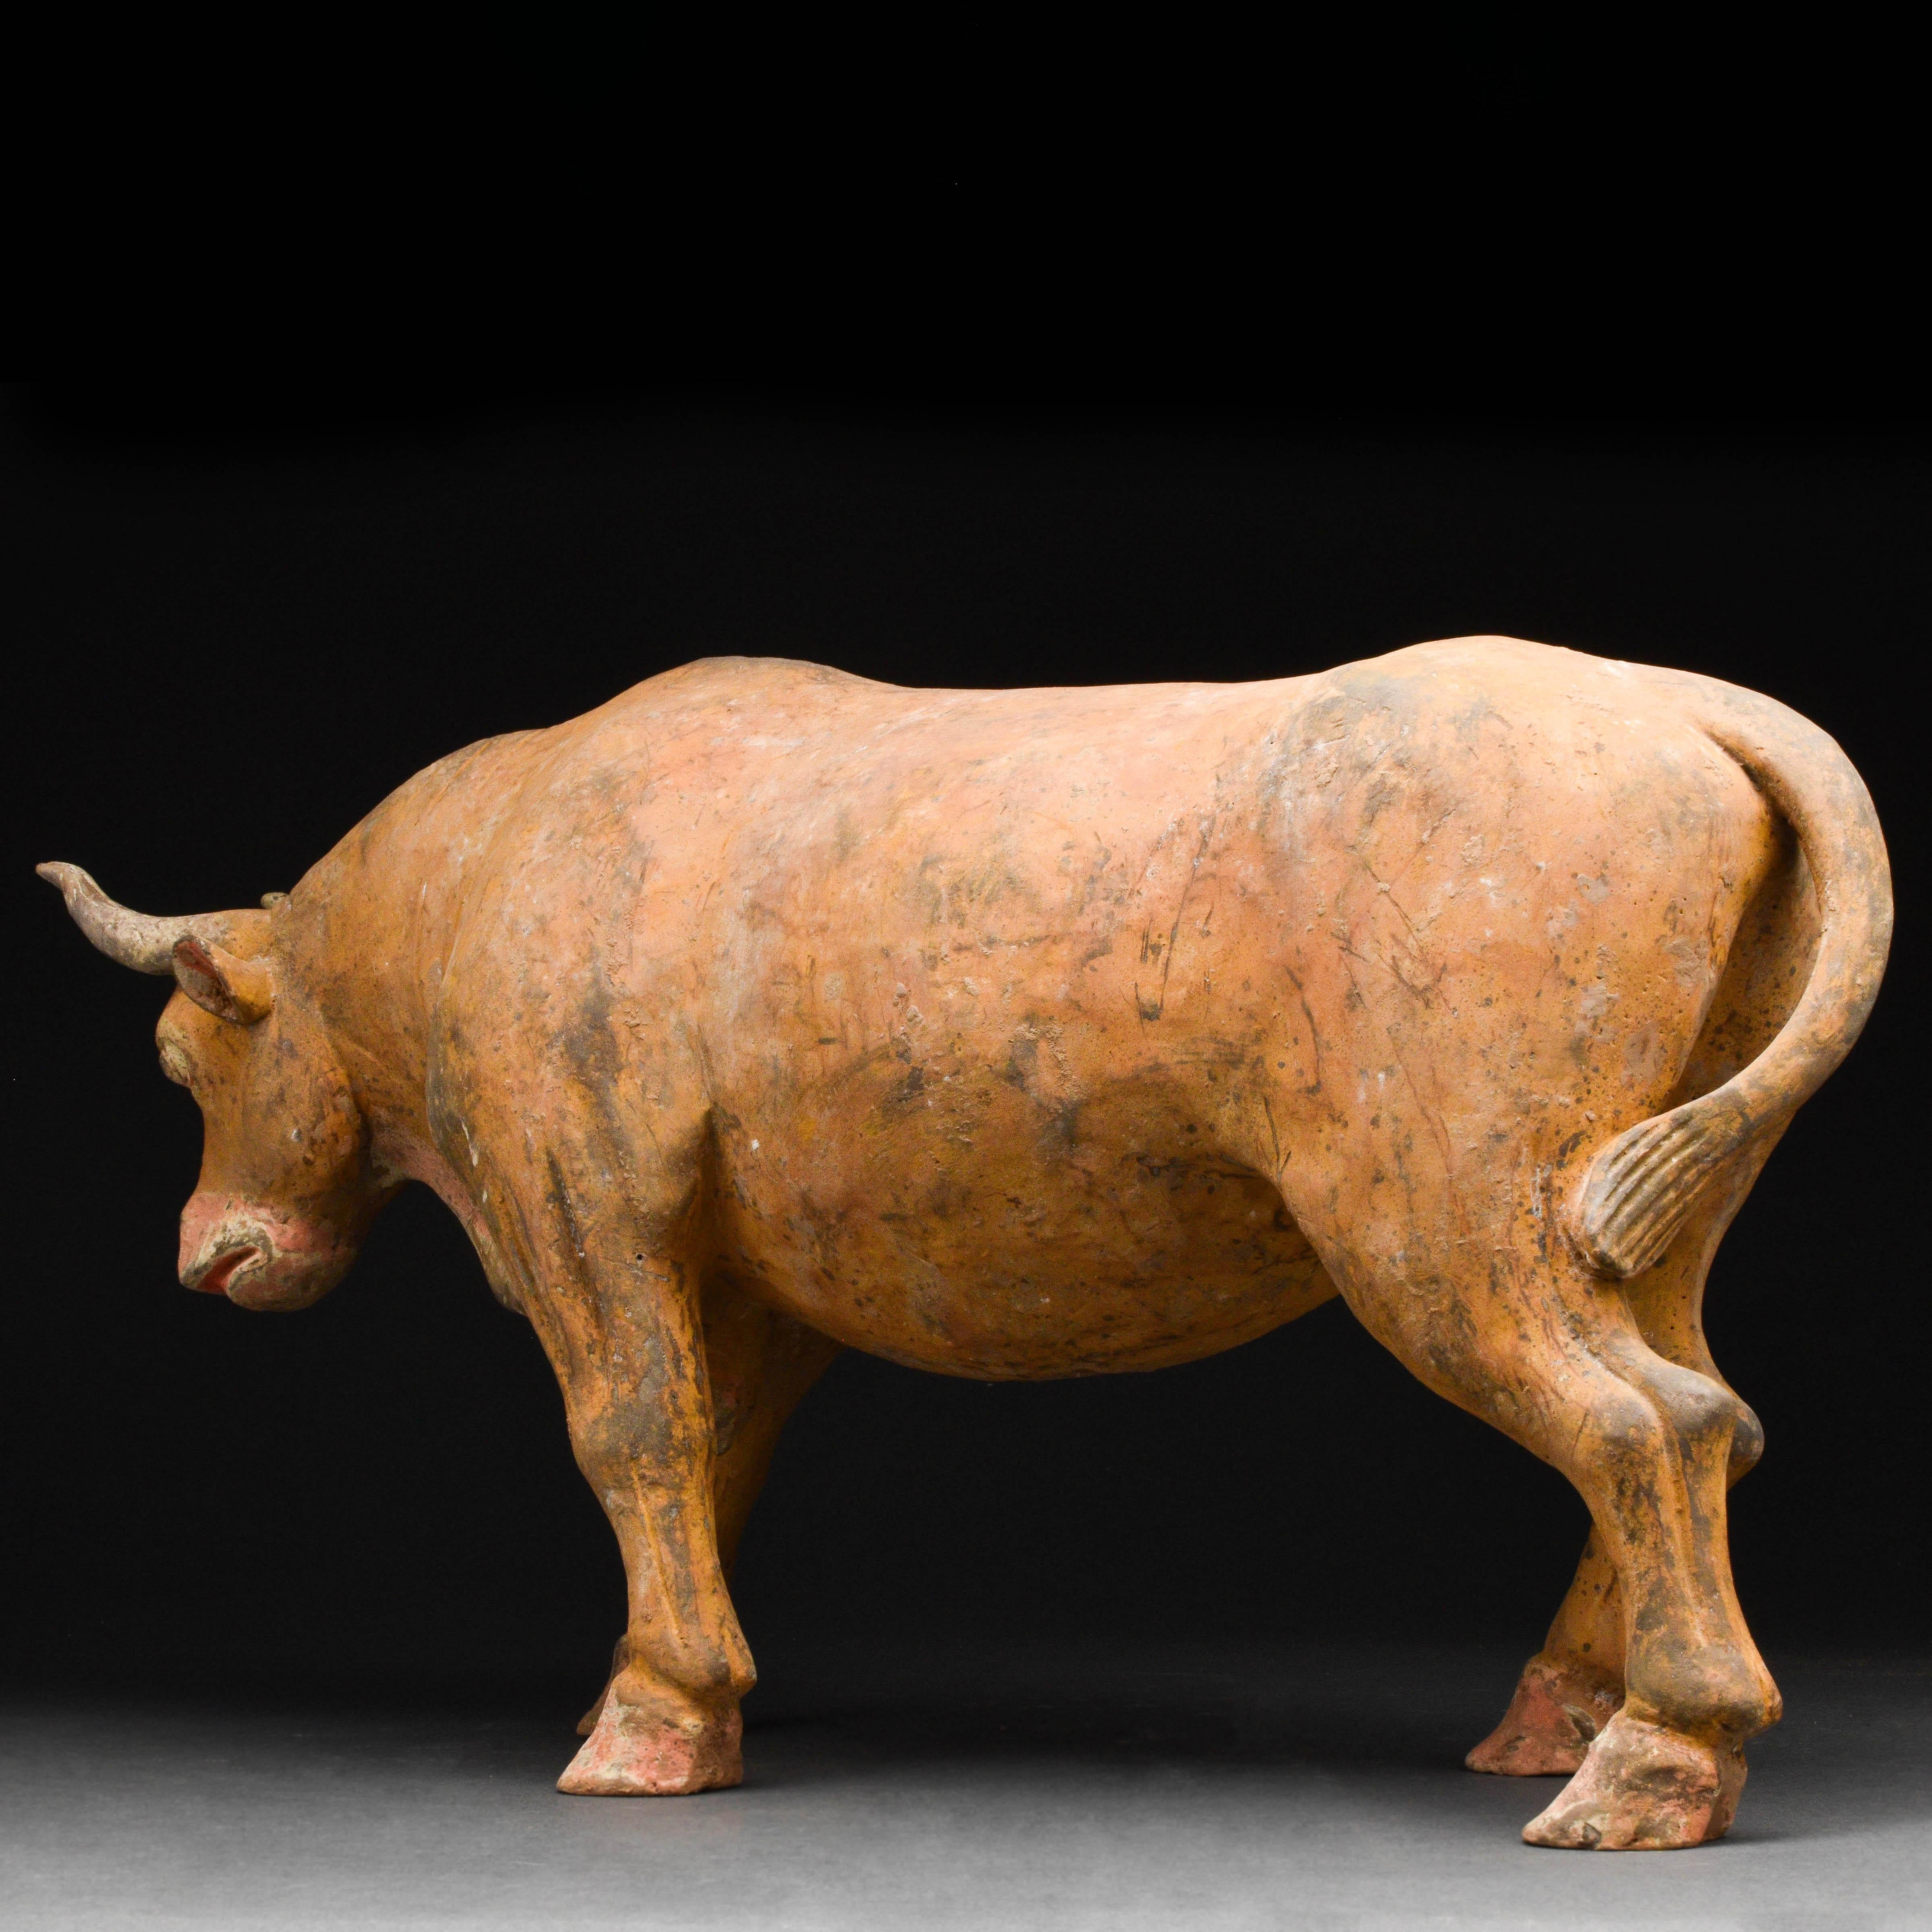 A naturalistic representation of a Chinese Tang Dynasty bull in a standing pose. This beautiful figure has its neck bent and head angled downwards, with a curved belly with a hole and tail that wraps itself around the back end. Traces of red pigment